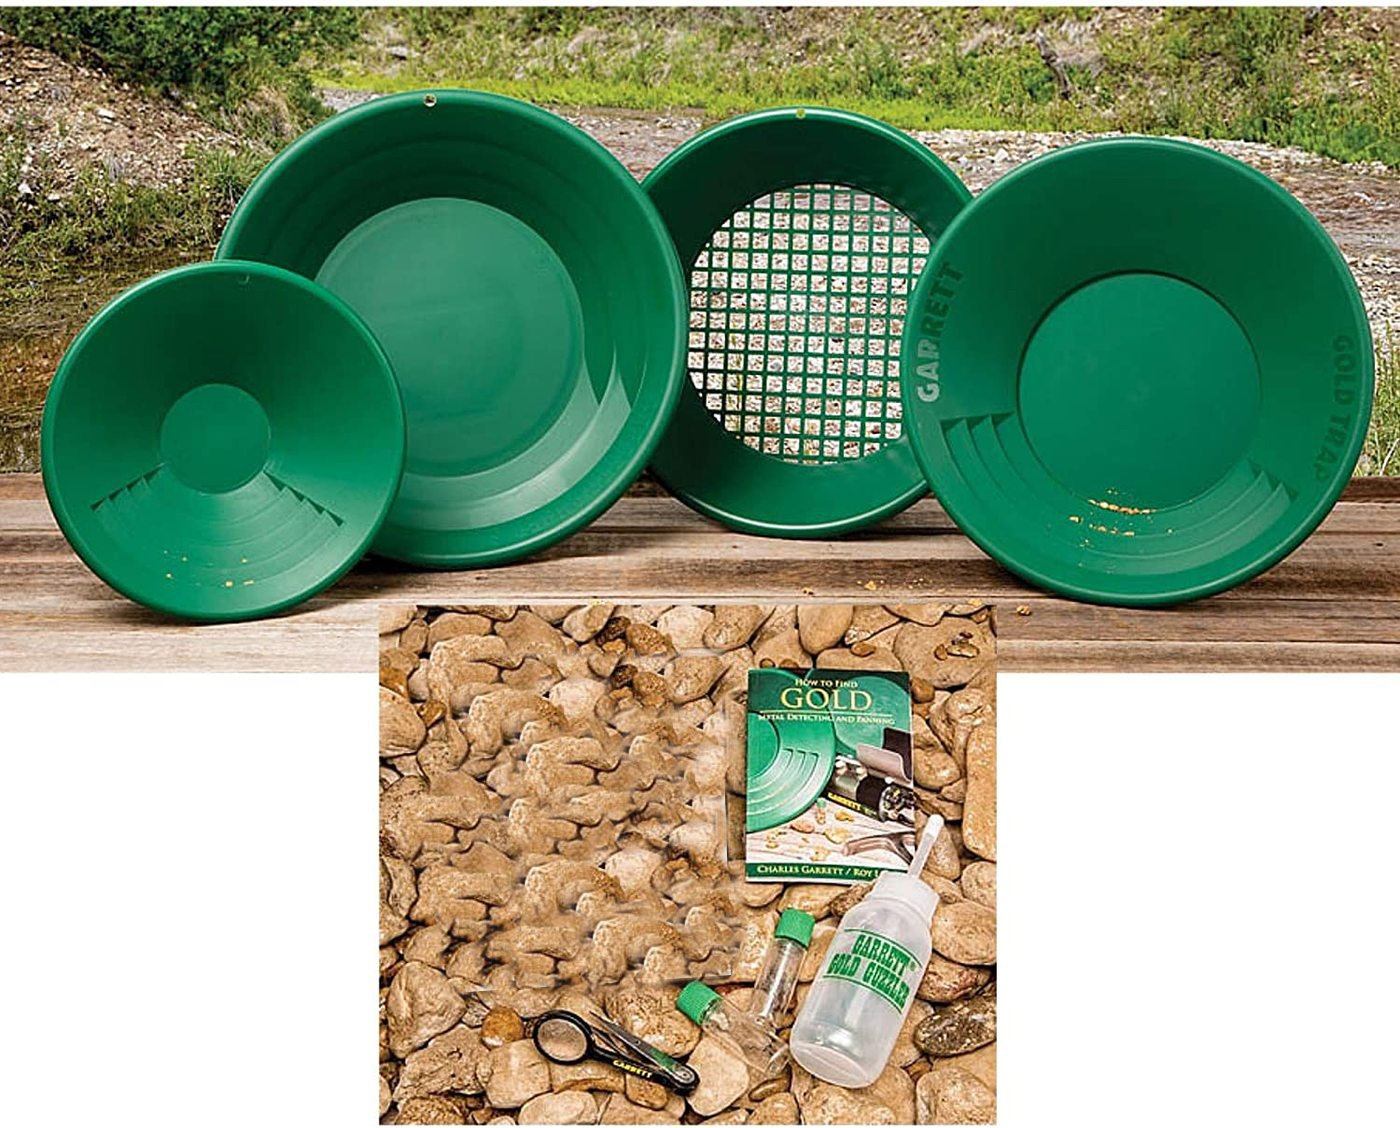 Included in the Garrett Deluxe Gold Panning Kit:  • 15" SuperSluice Pan  • 14" Prospector Pan  • 10" Backpacker Pan  • Classifier  • Gold Guzzler bottle  • 2 Gold vials  • Tweezers  • How to Find Gold field guide by Charles Garrett and Roy Lagal lifestyle image